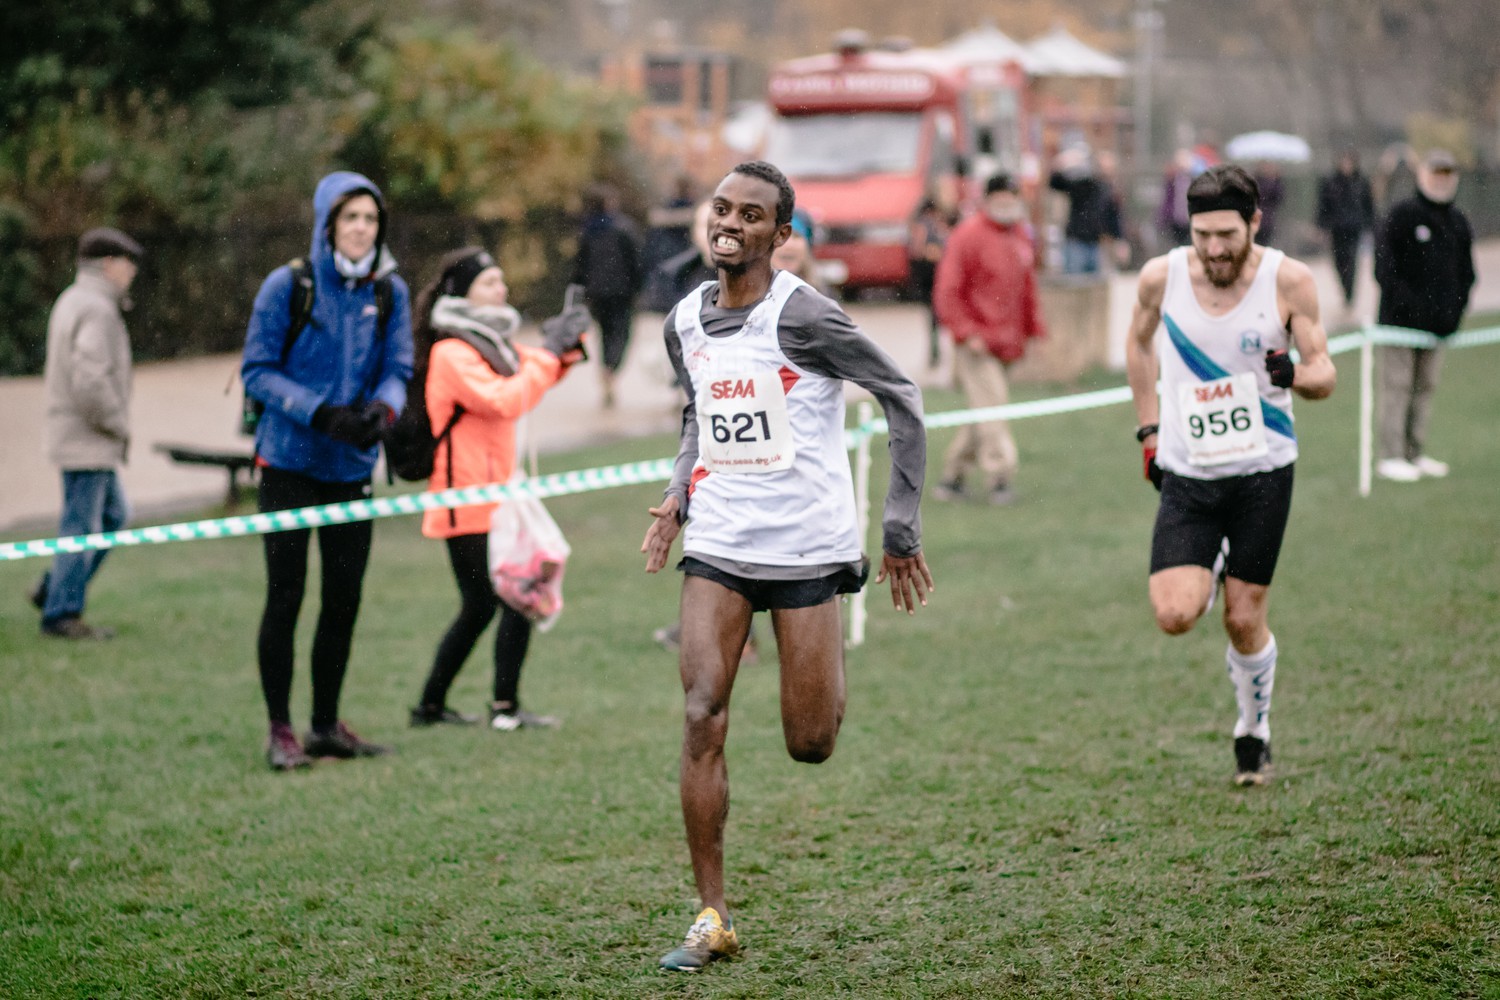 2017 London Cross Country Championships photos